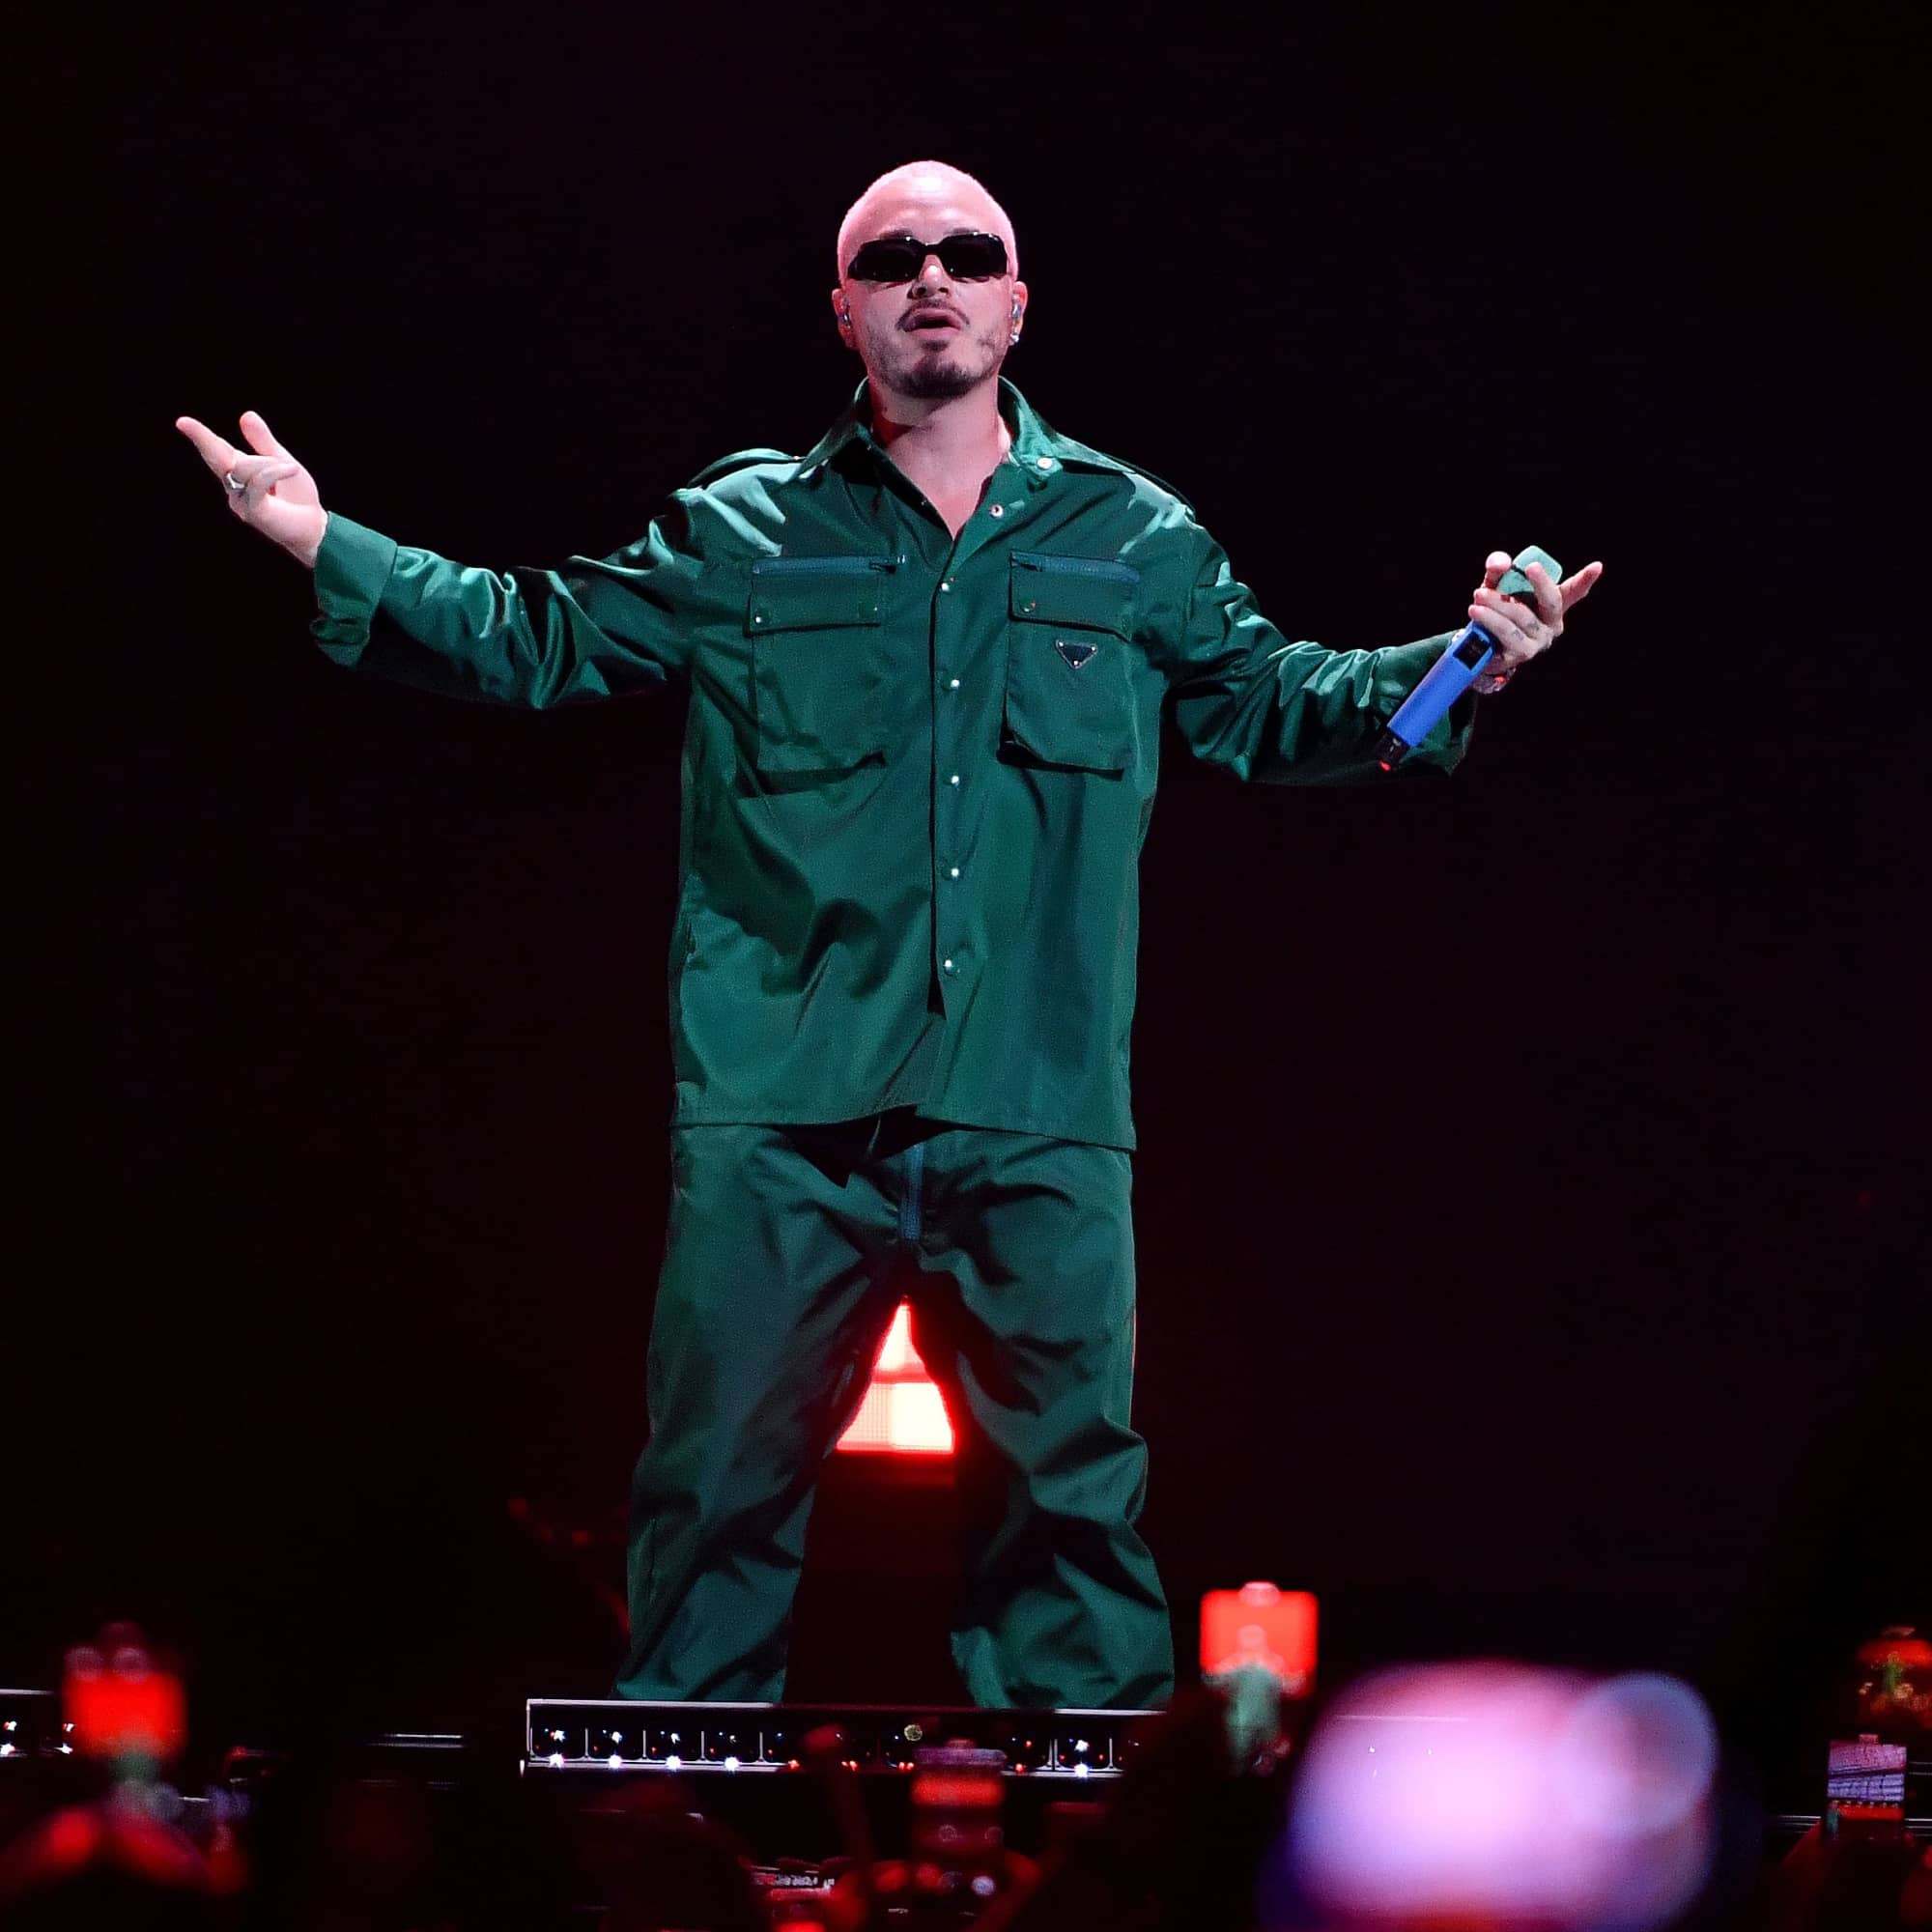 Commentary: J Balvin and Tokischa's 'Perra' video removed from